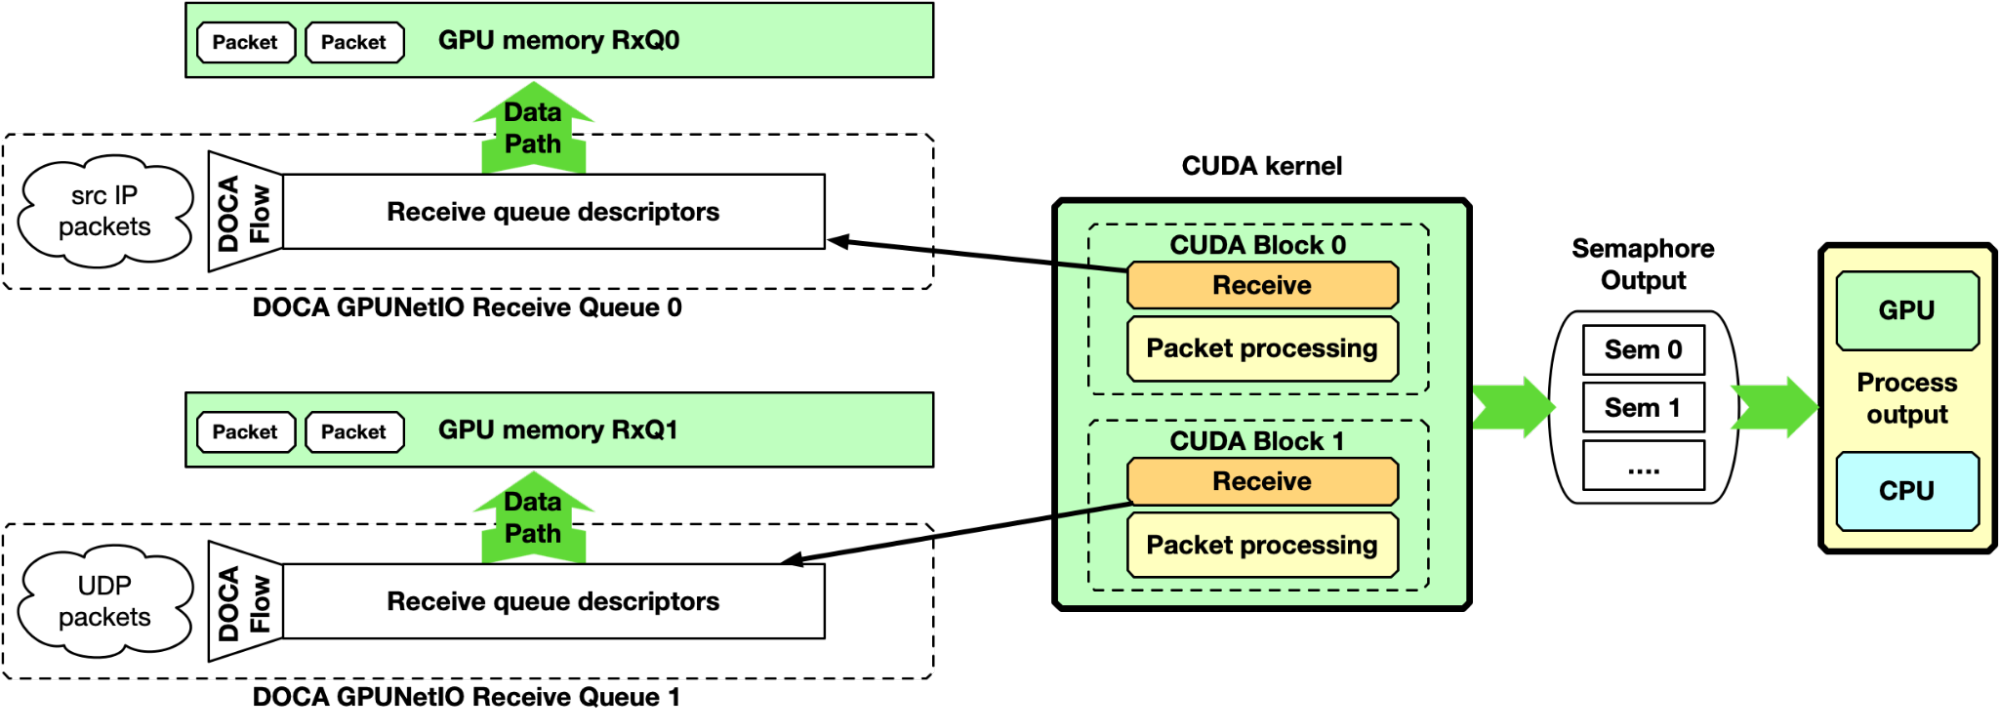 Graphic showing GPU packet processing pipeline with a single GPU CUDA kernel receiving packets in GPU memory and doing the packet processing